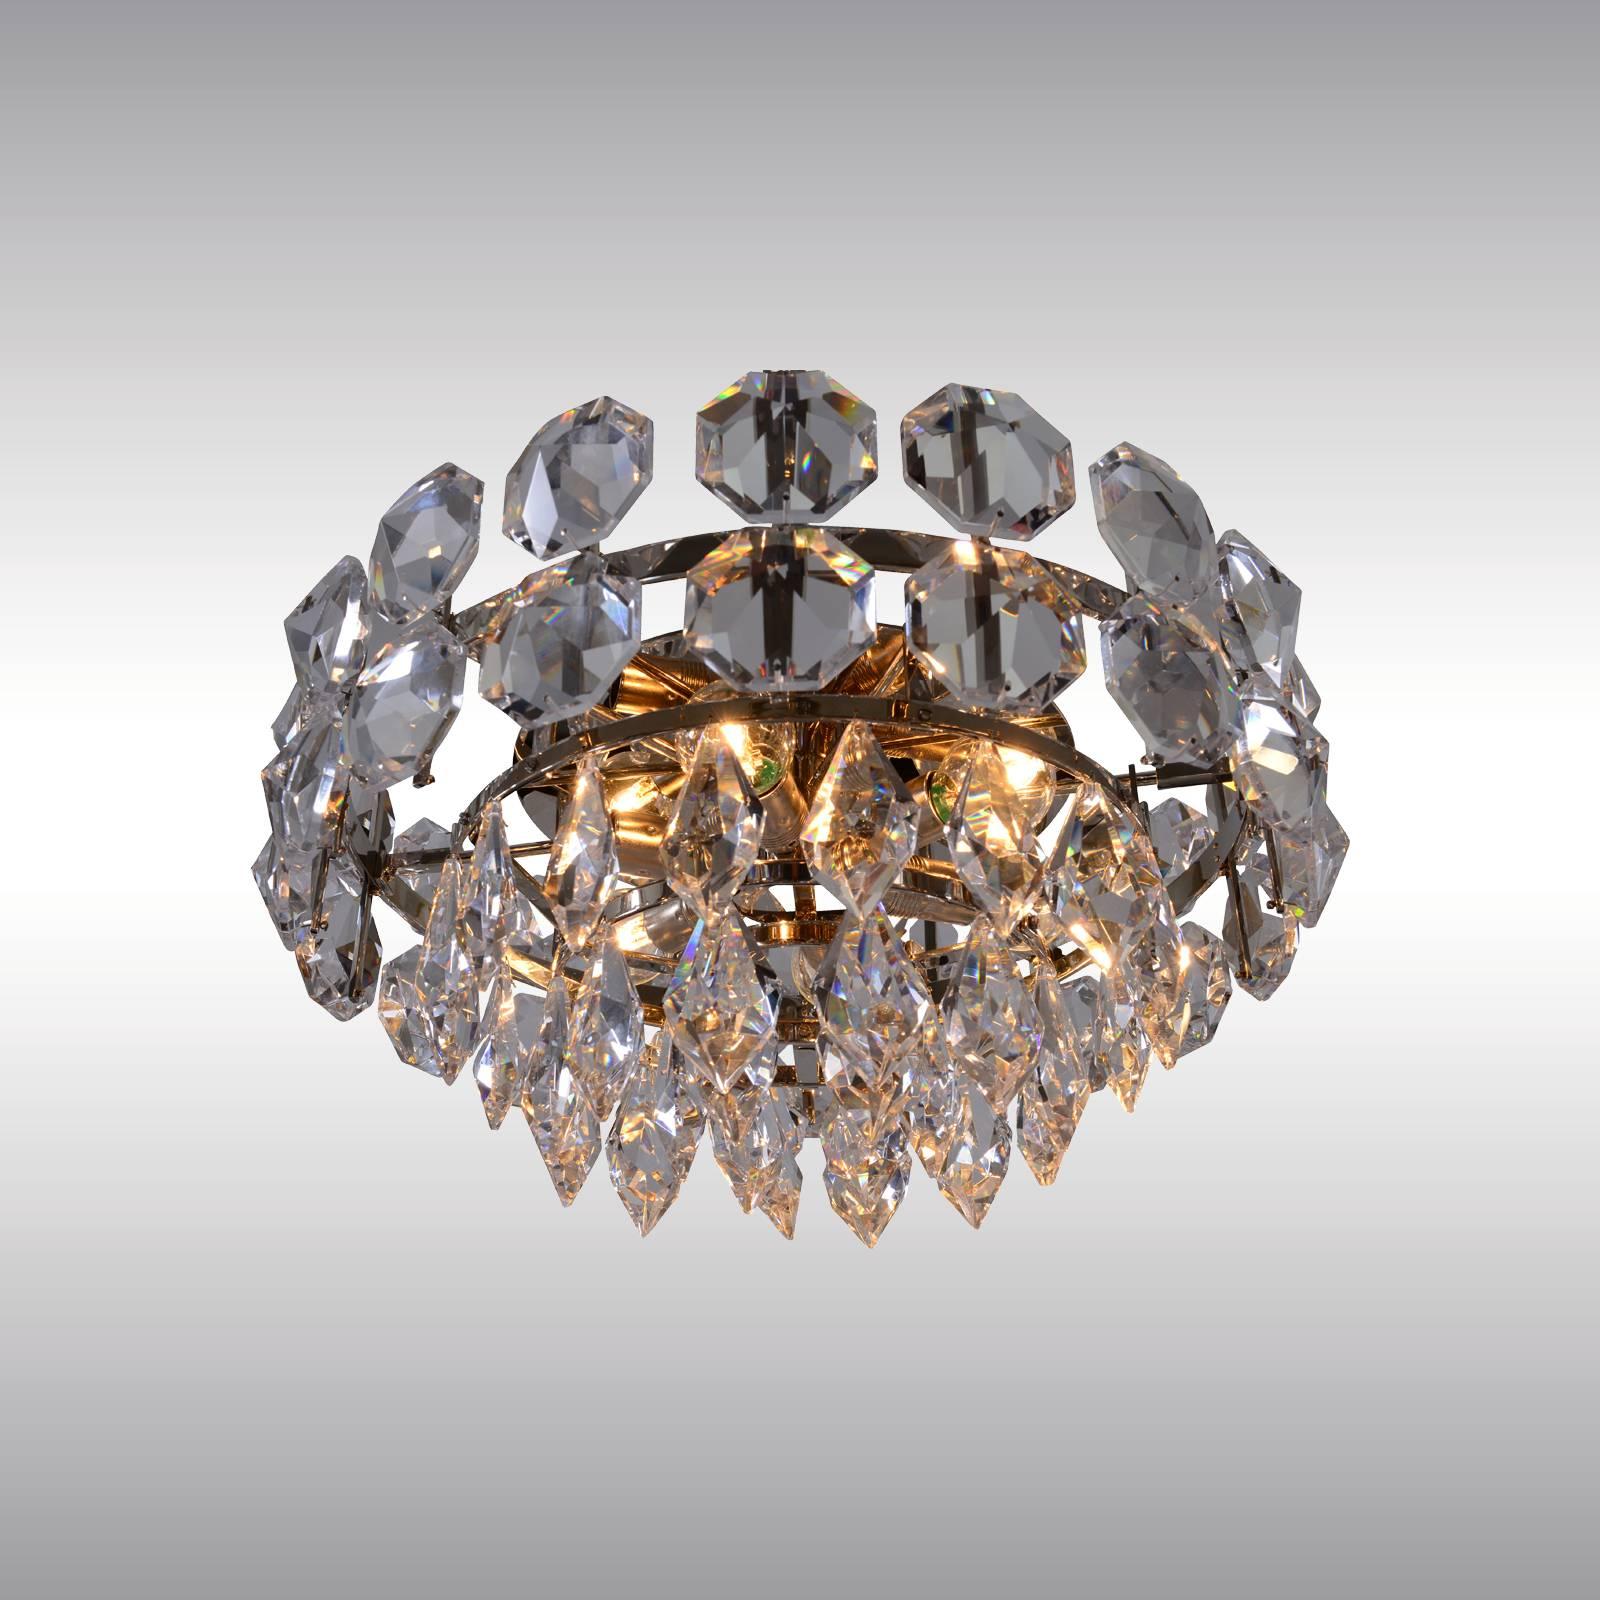 Austrian Mid-Century Modern Style Very Big Crystal-Glass Stone Chandelier, Re-Edition For Sale